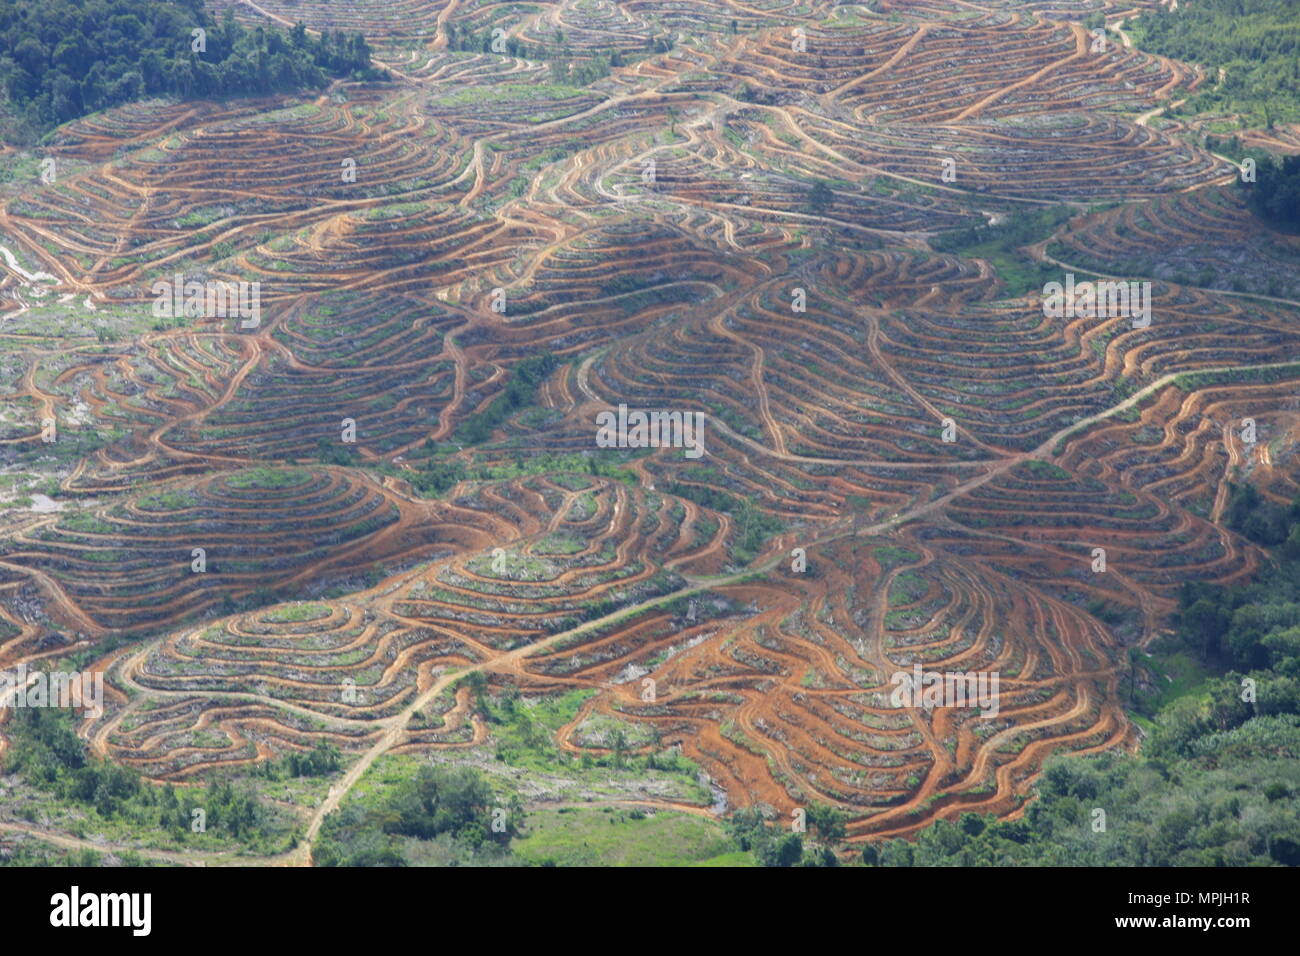 Aerial shots of Sarawak - human impact on the rainforest - deforestation for crops Stock Photo